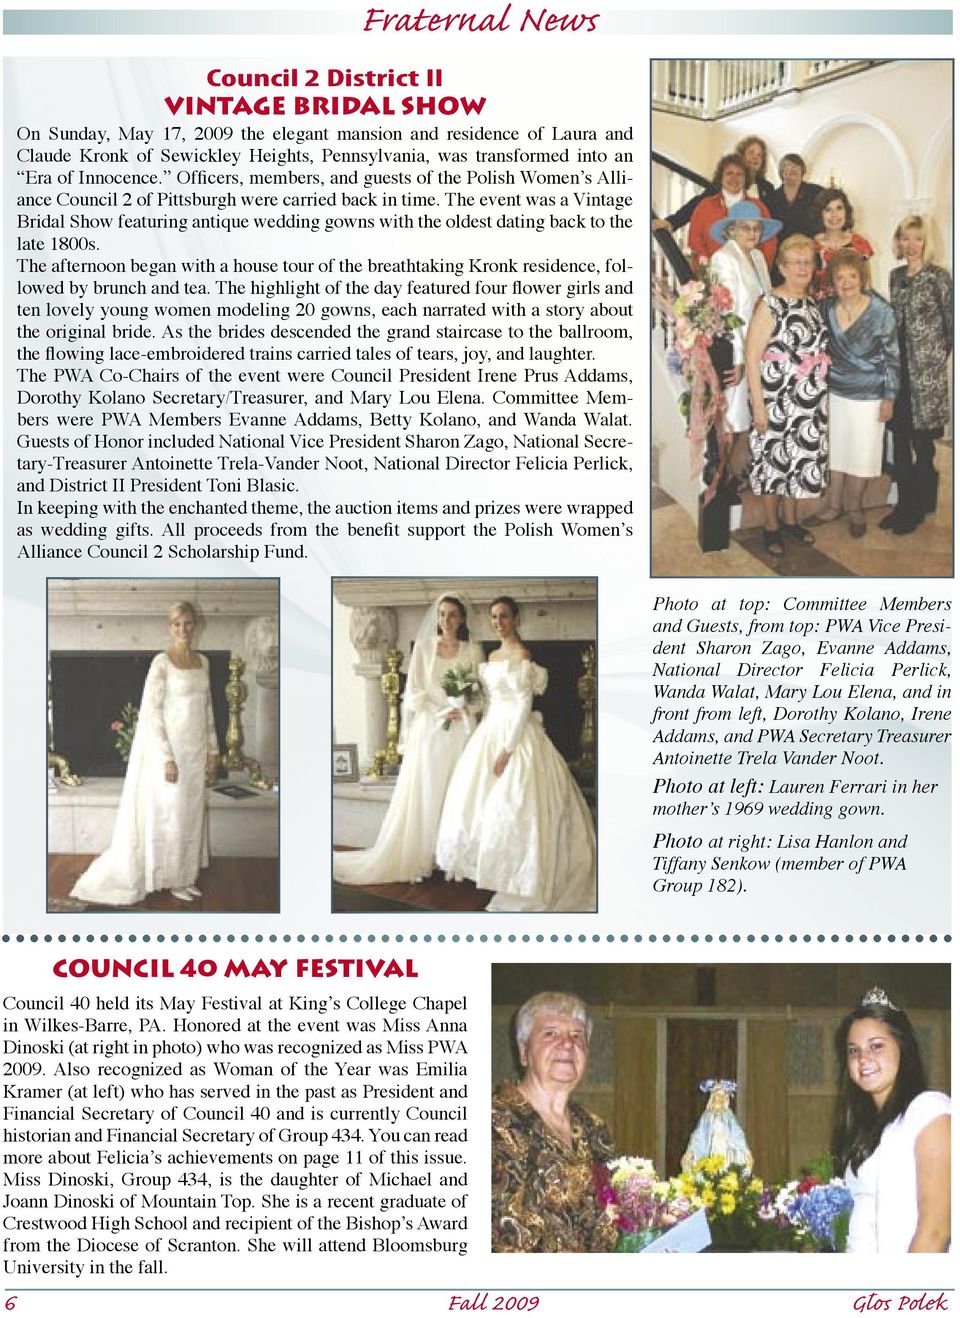 The event was a Vintage Bridal Show featuring antique wedding gowns with the oldest dating back to the late 1800s.